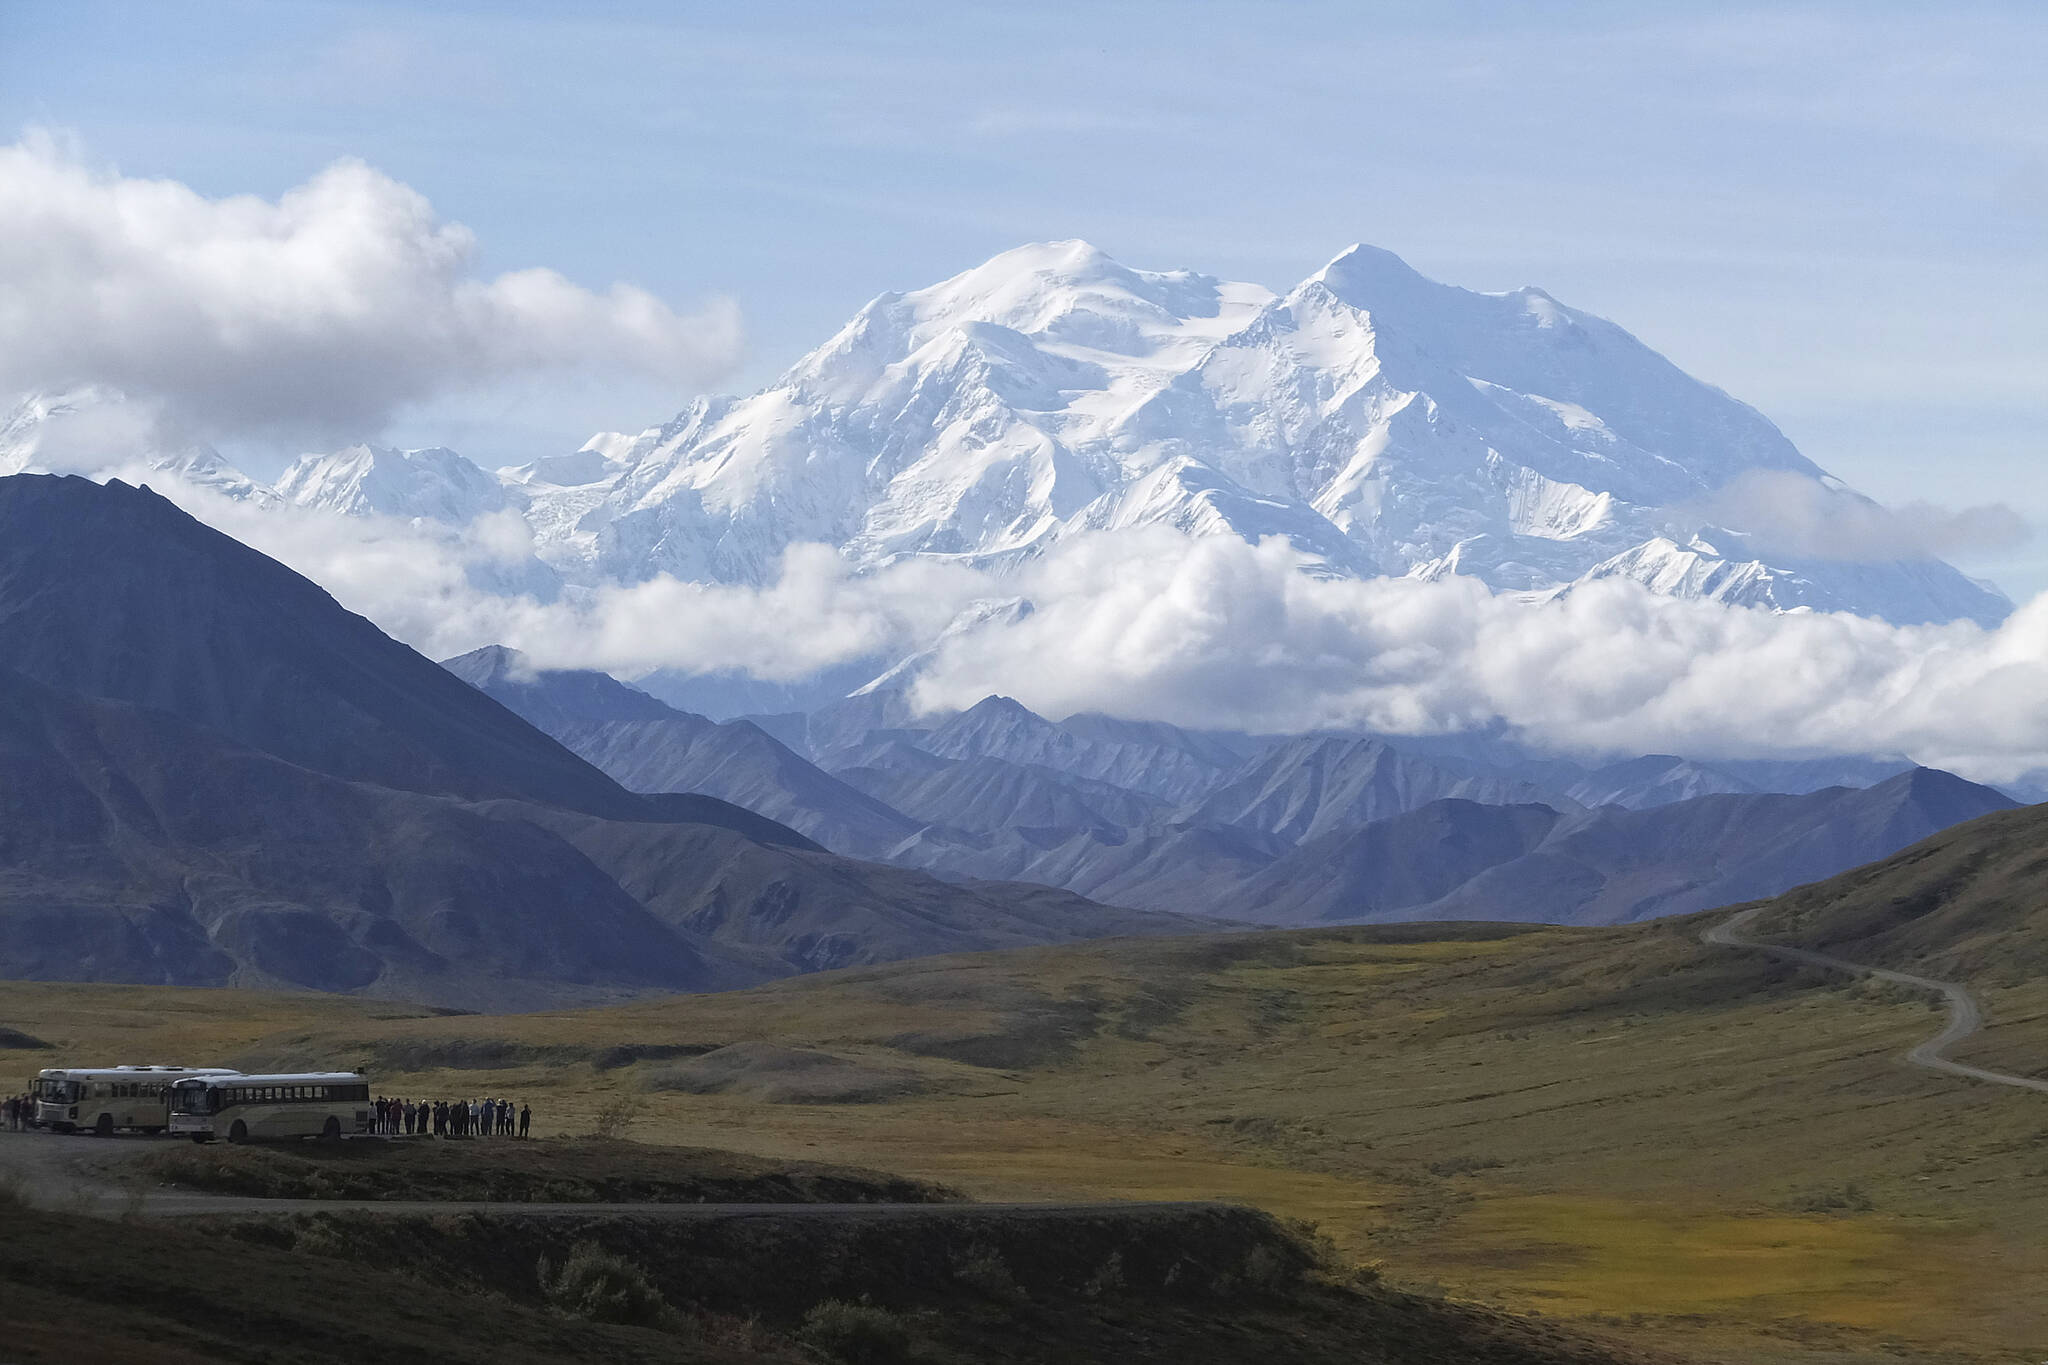 Sightseeing buses and tourists are seen at a pullout popular for taking in views of North America’s tallest peak, Denali, in Denali National Park and Preserve in August 2016. (AP Photo / Becky Bohrer)